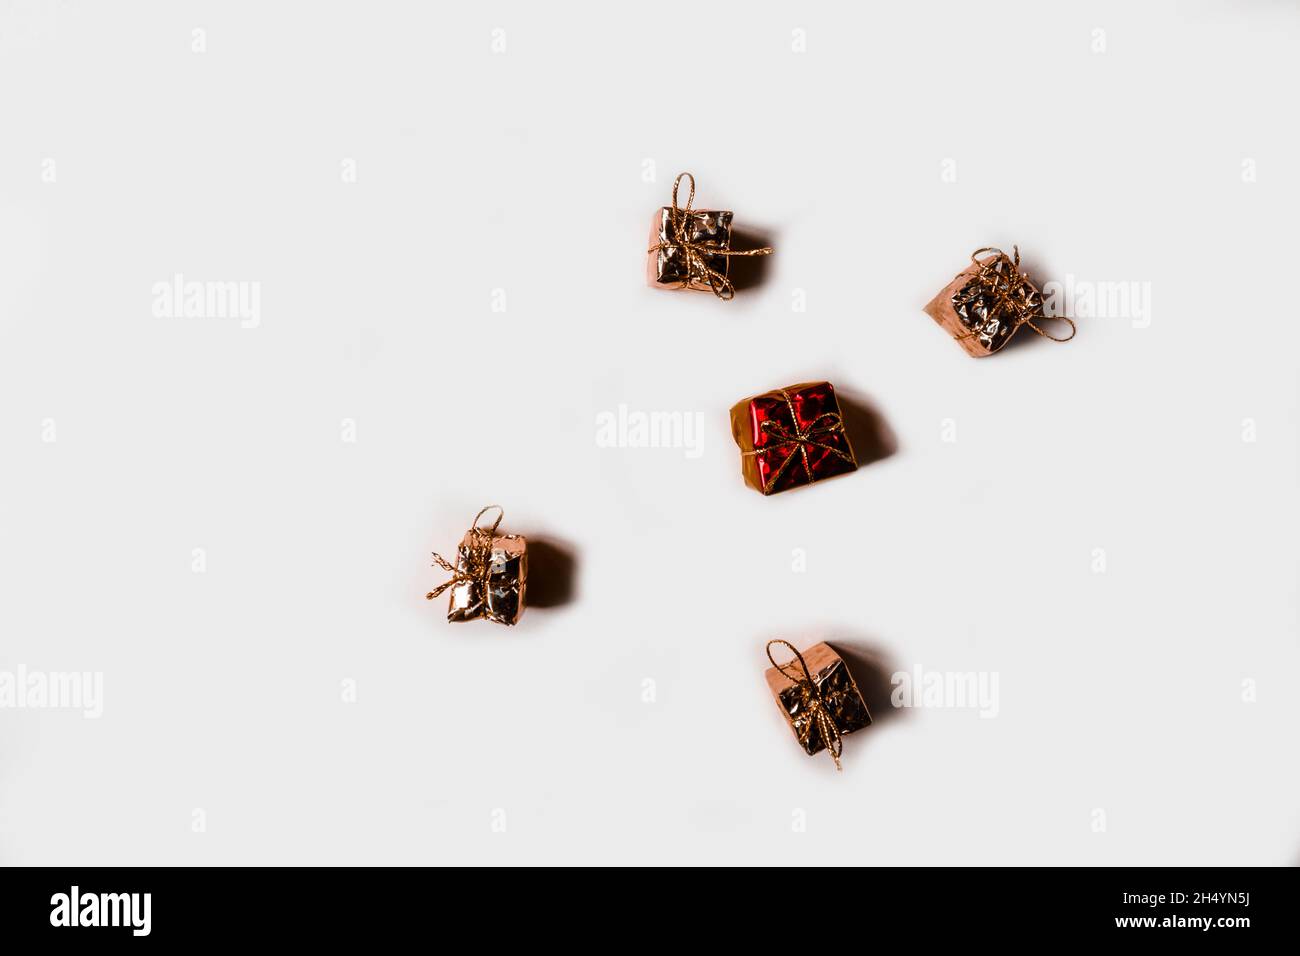 Five small gifts lie on a white background. View from above. Stock Photo